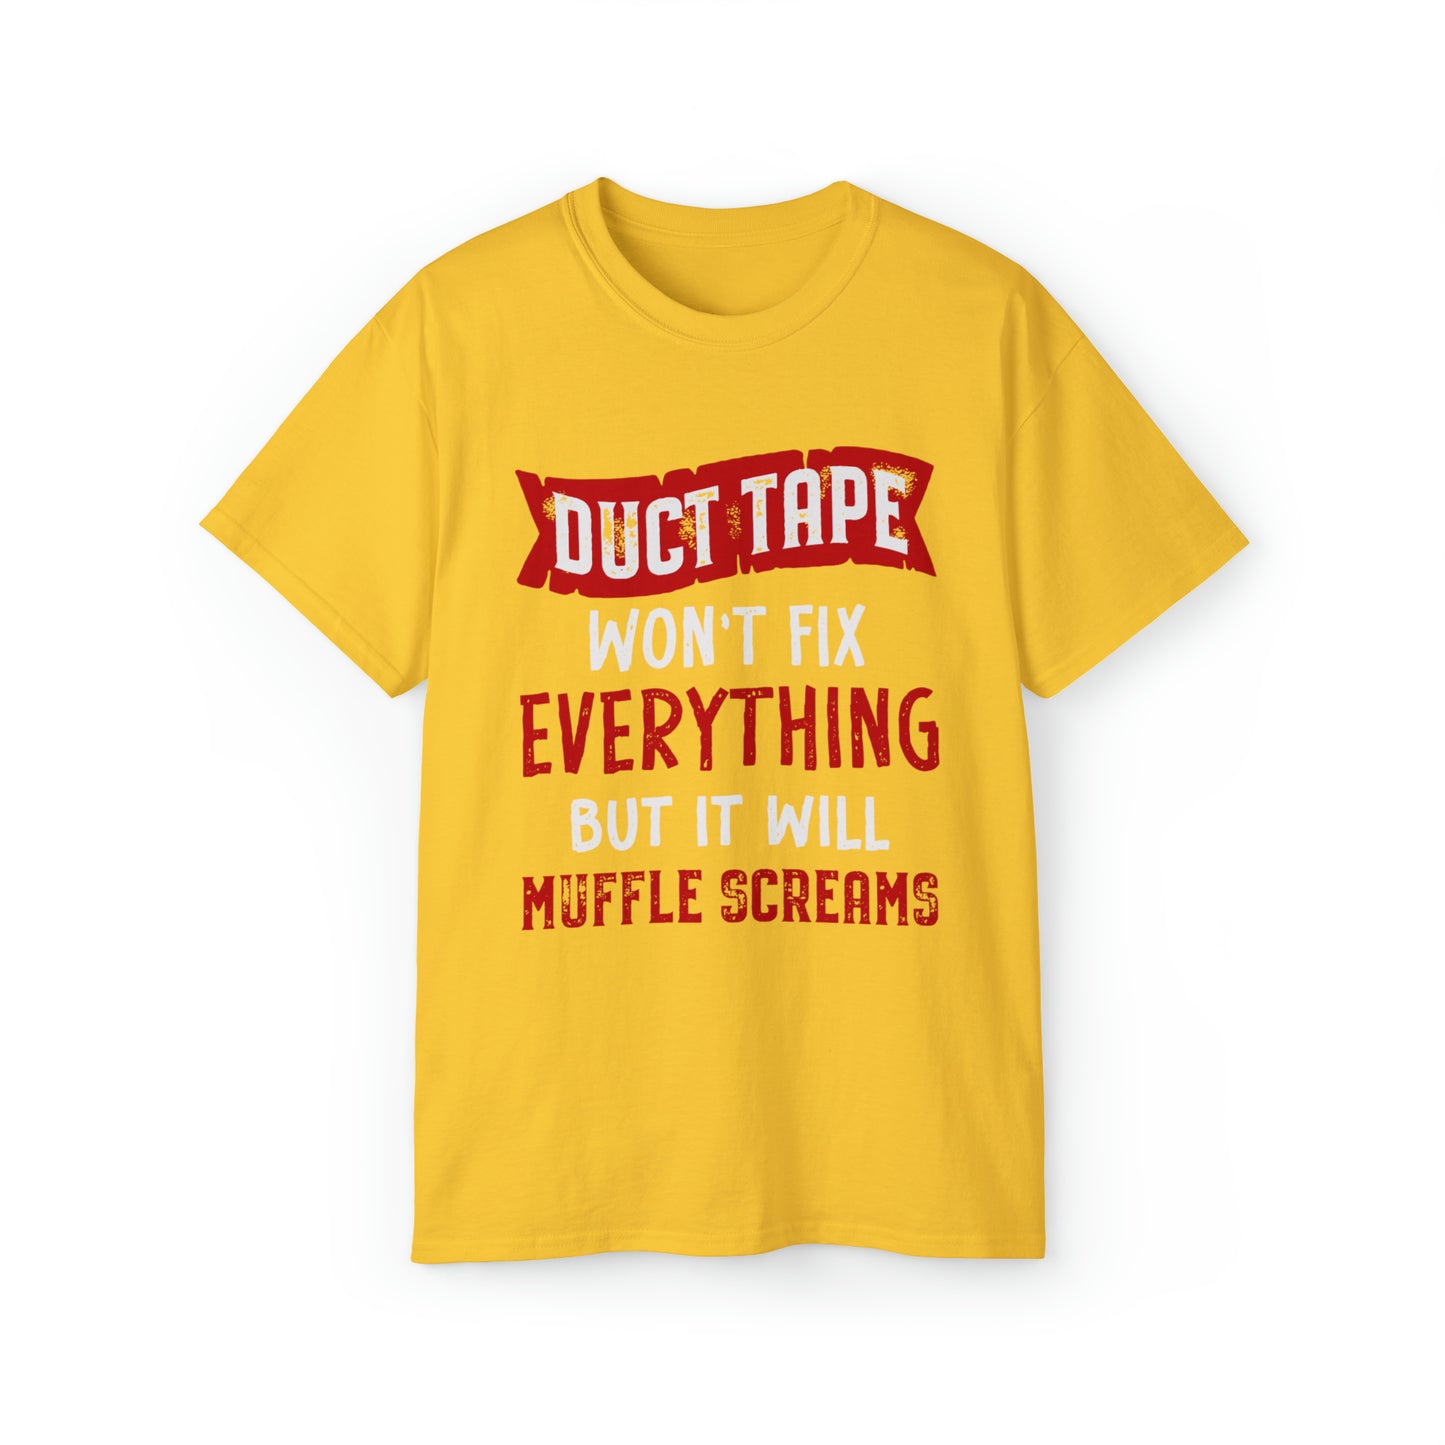 Duct Tape Won't Fix Everything But It Will Muffle Screams Tee